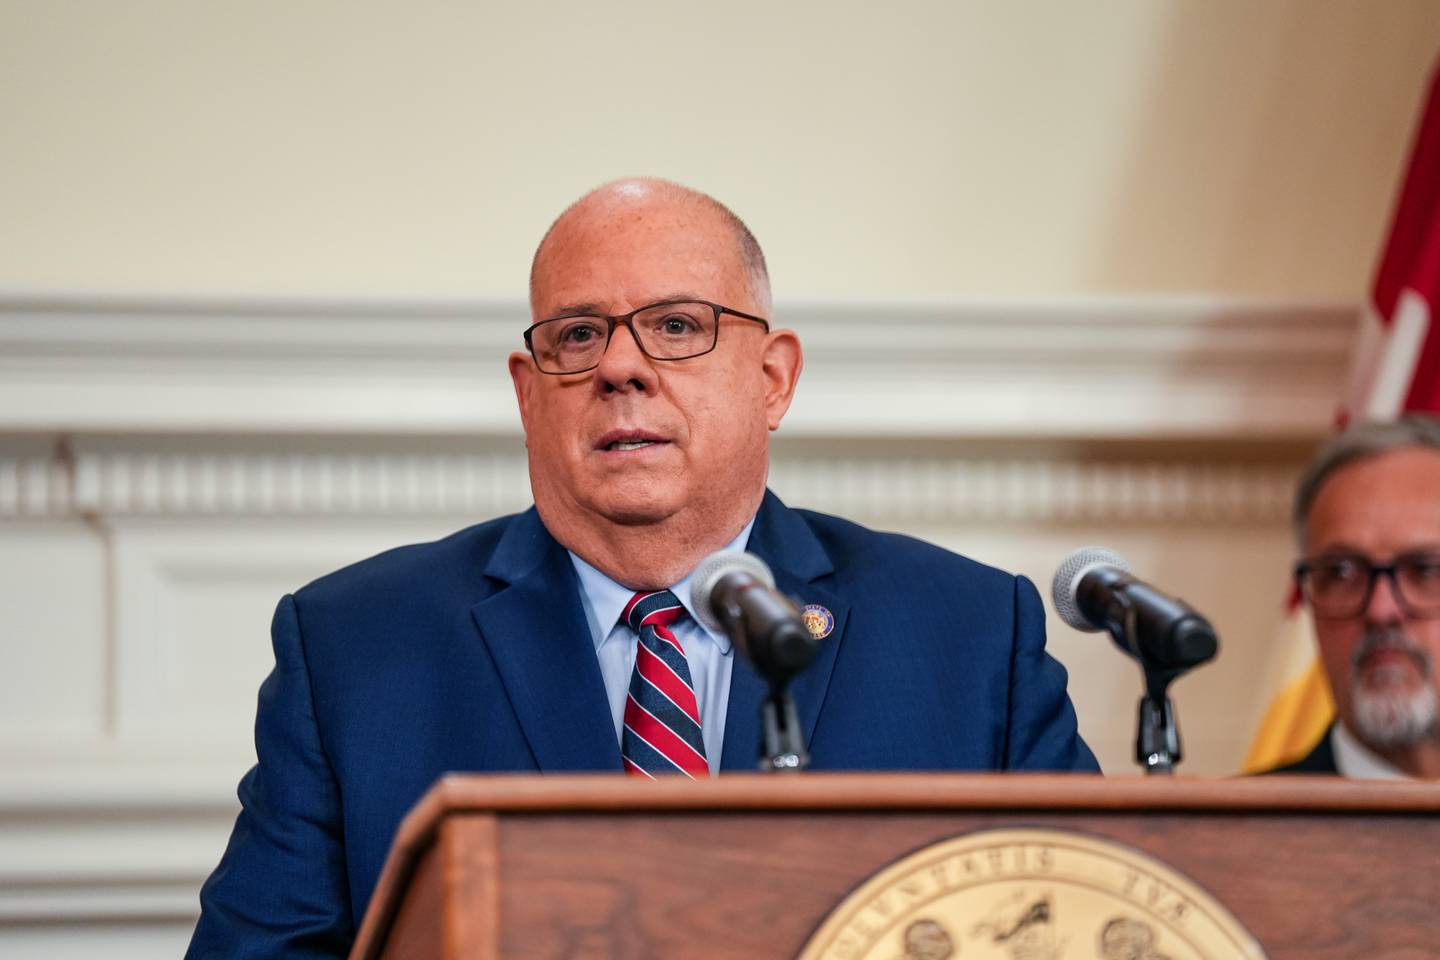 Maryland Gov. Larry Hogan announces the launch of mobile sports gambling to begin on November 23rd, at 9 a.m., he made the announcement from the State House, in Annapolis, MD., on November 22, 2022.